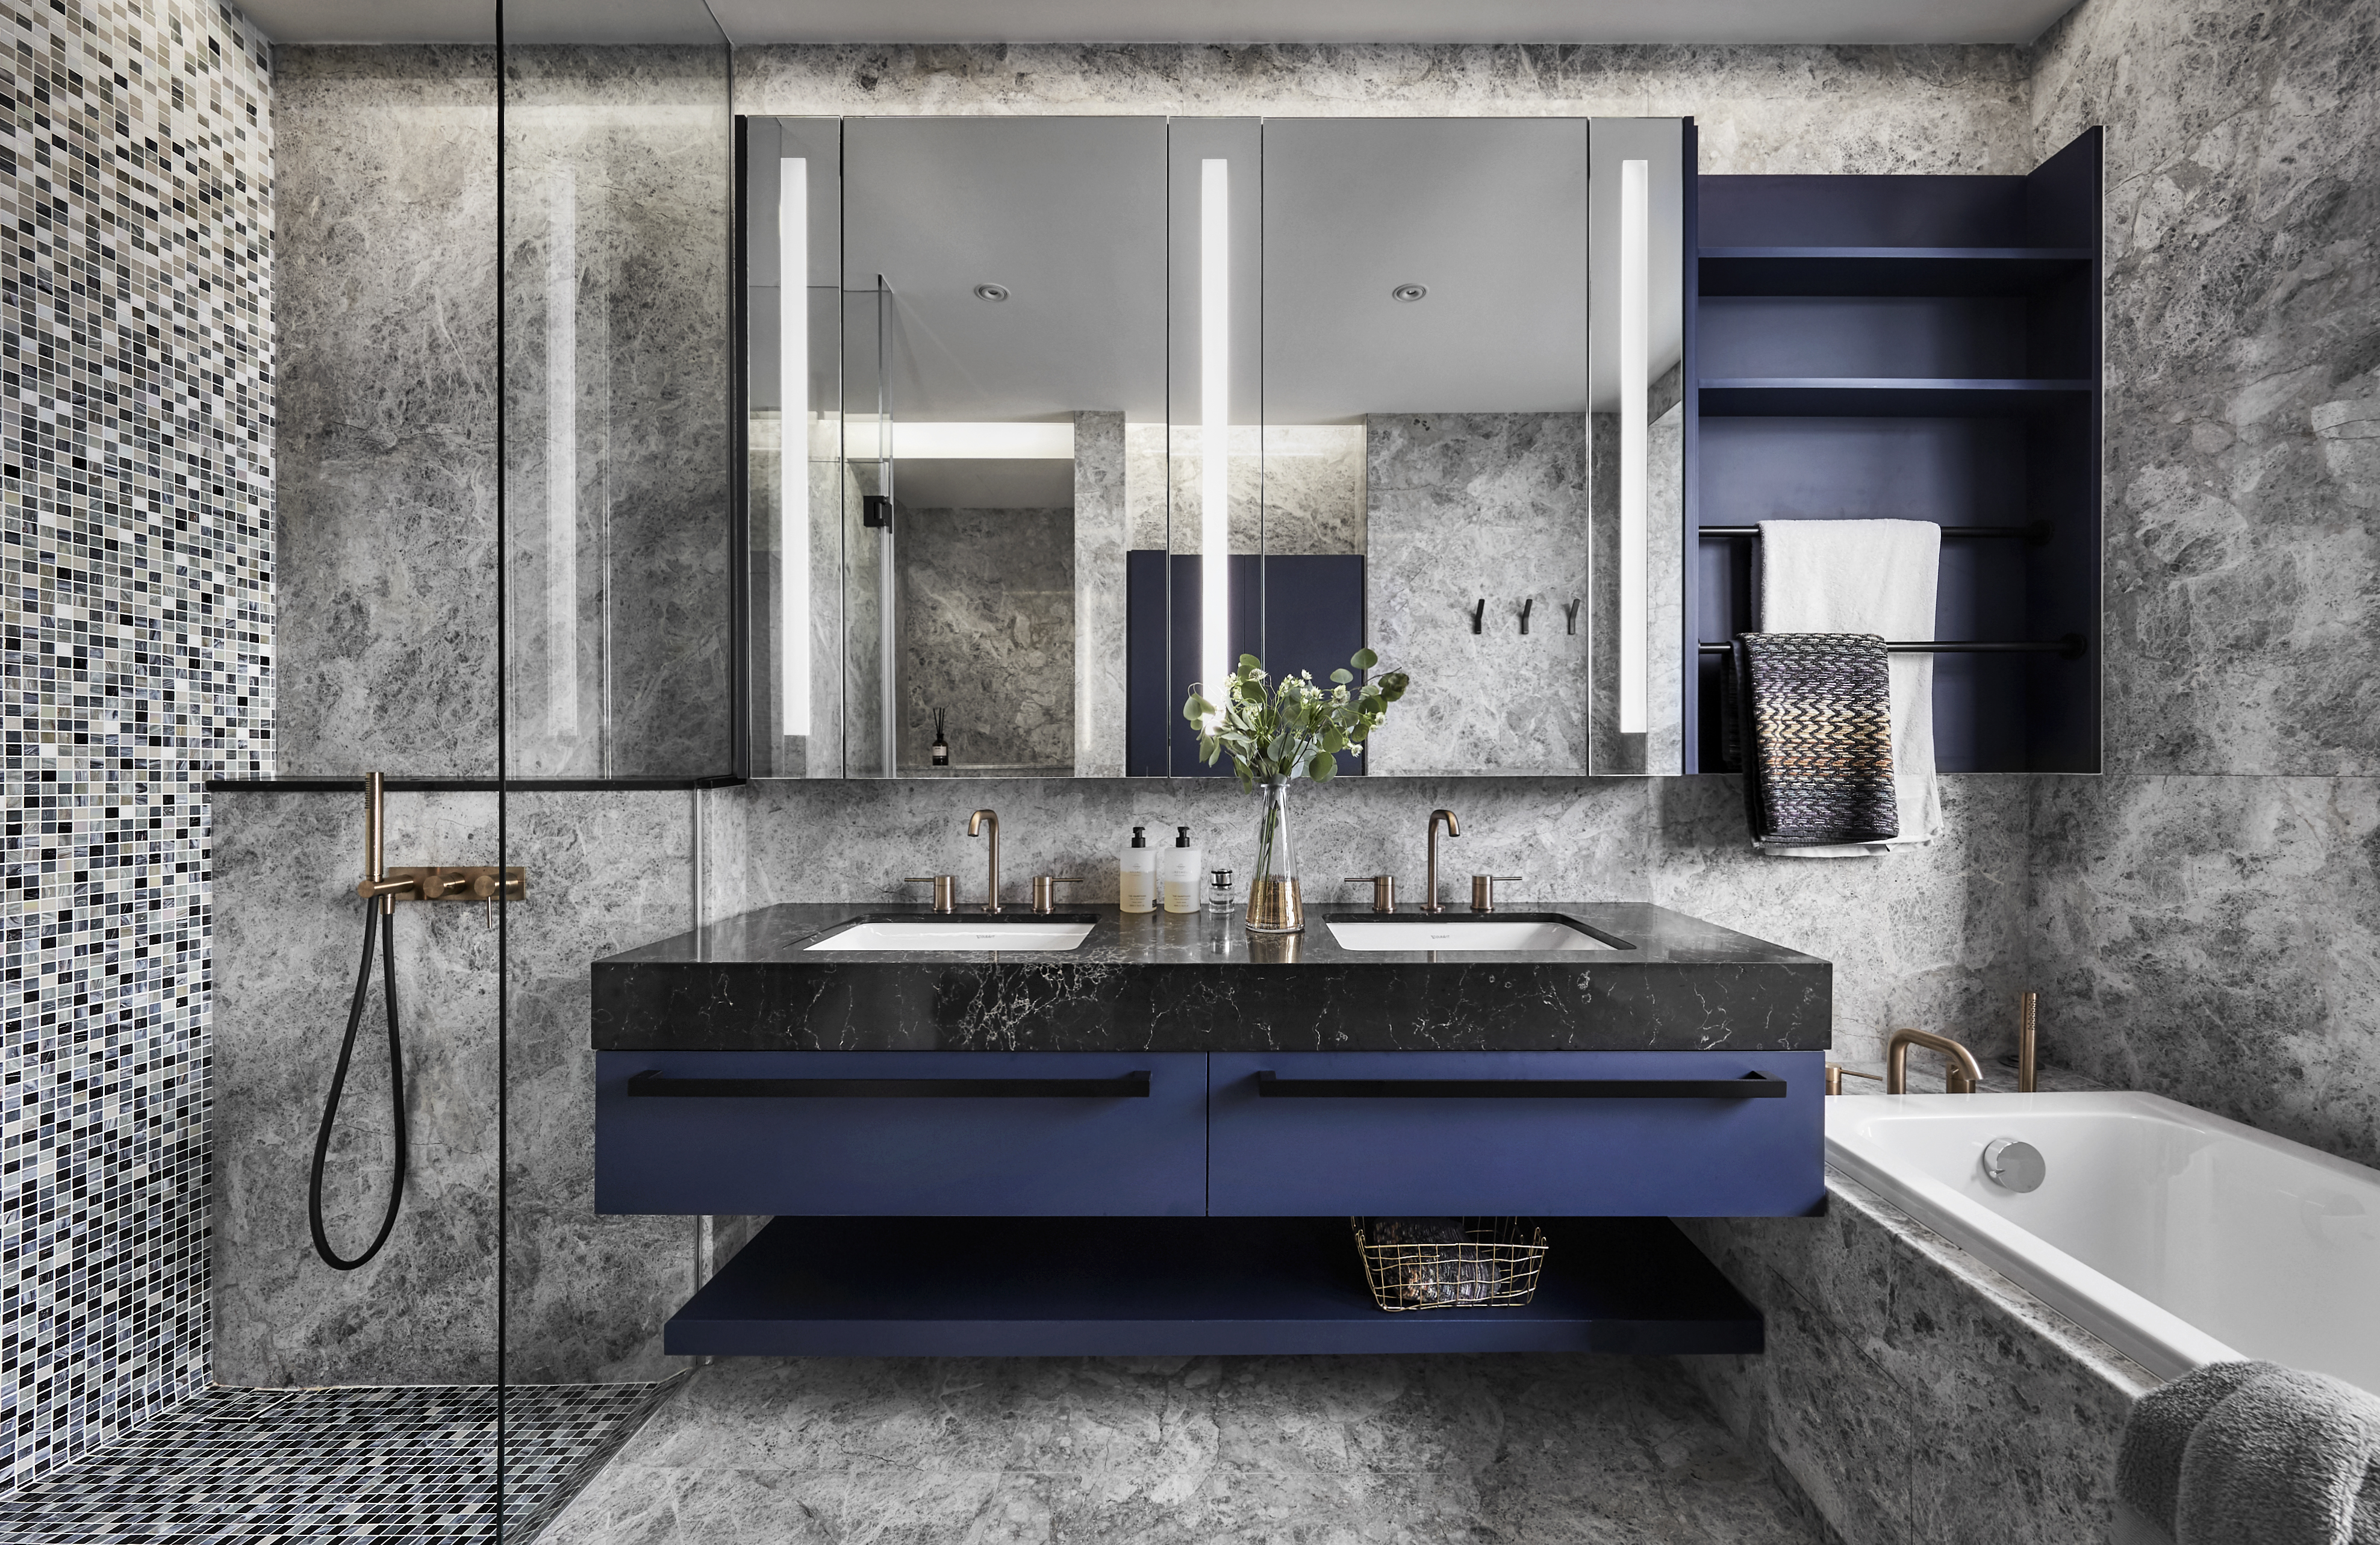 A modern bathroom with blue and black marble.